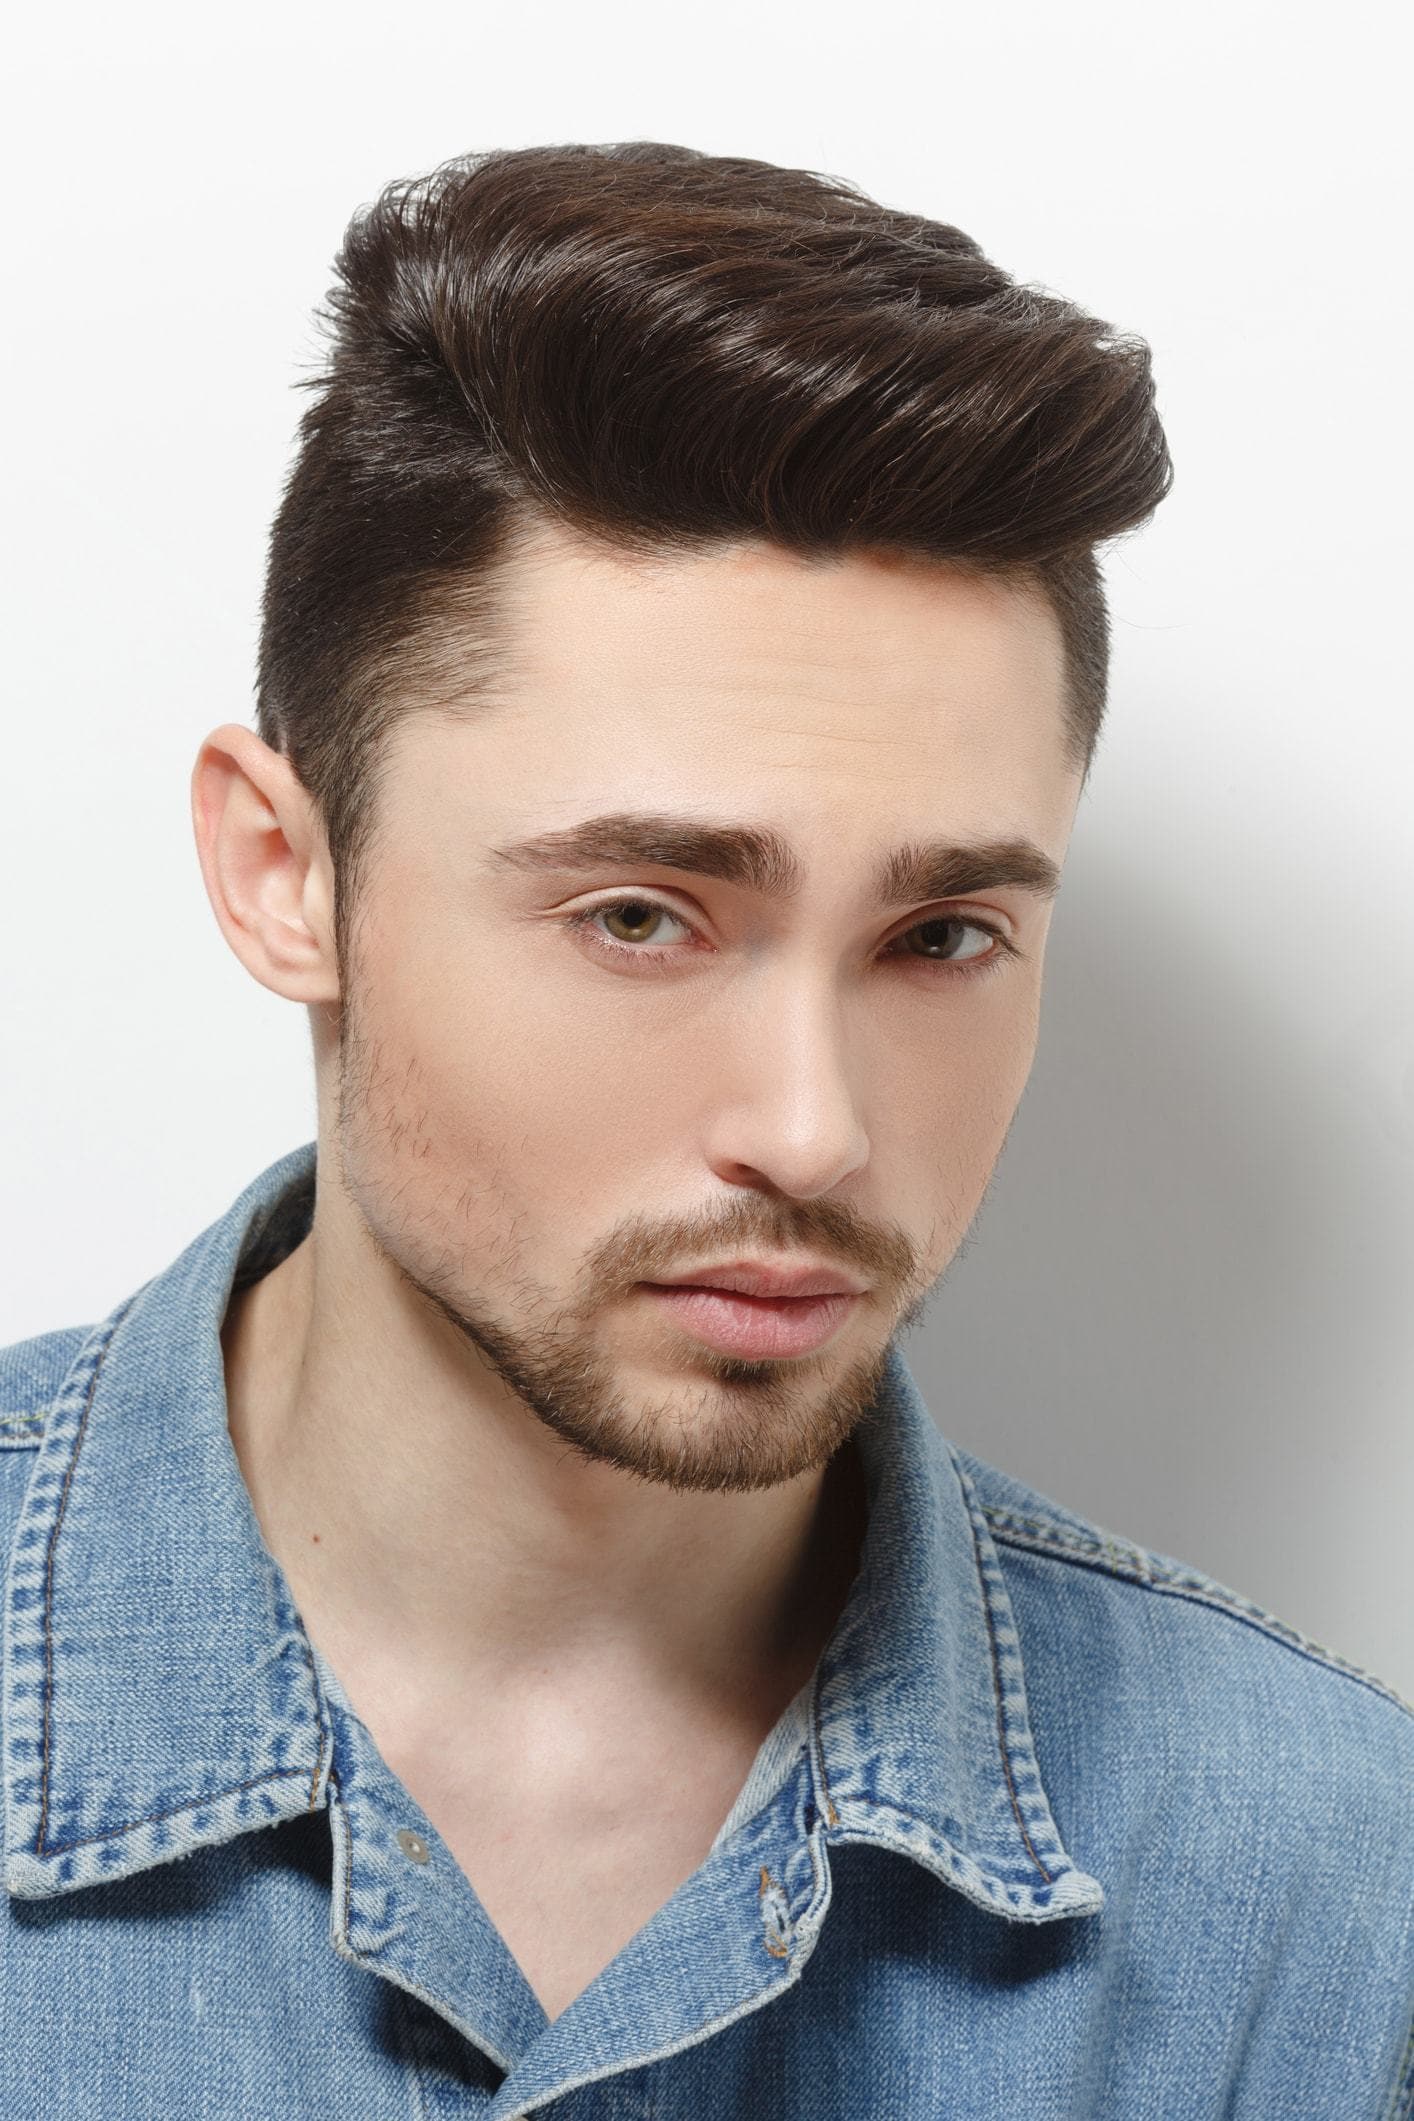 professional haircuts for guys11